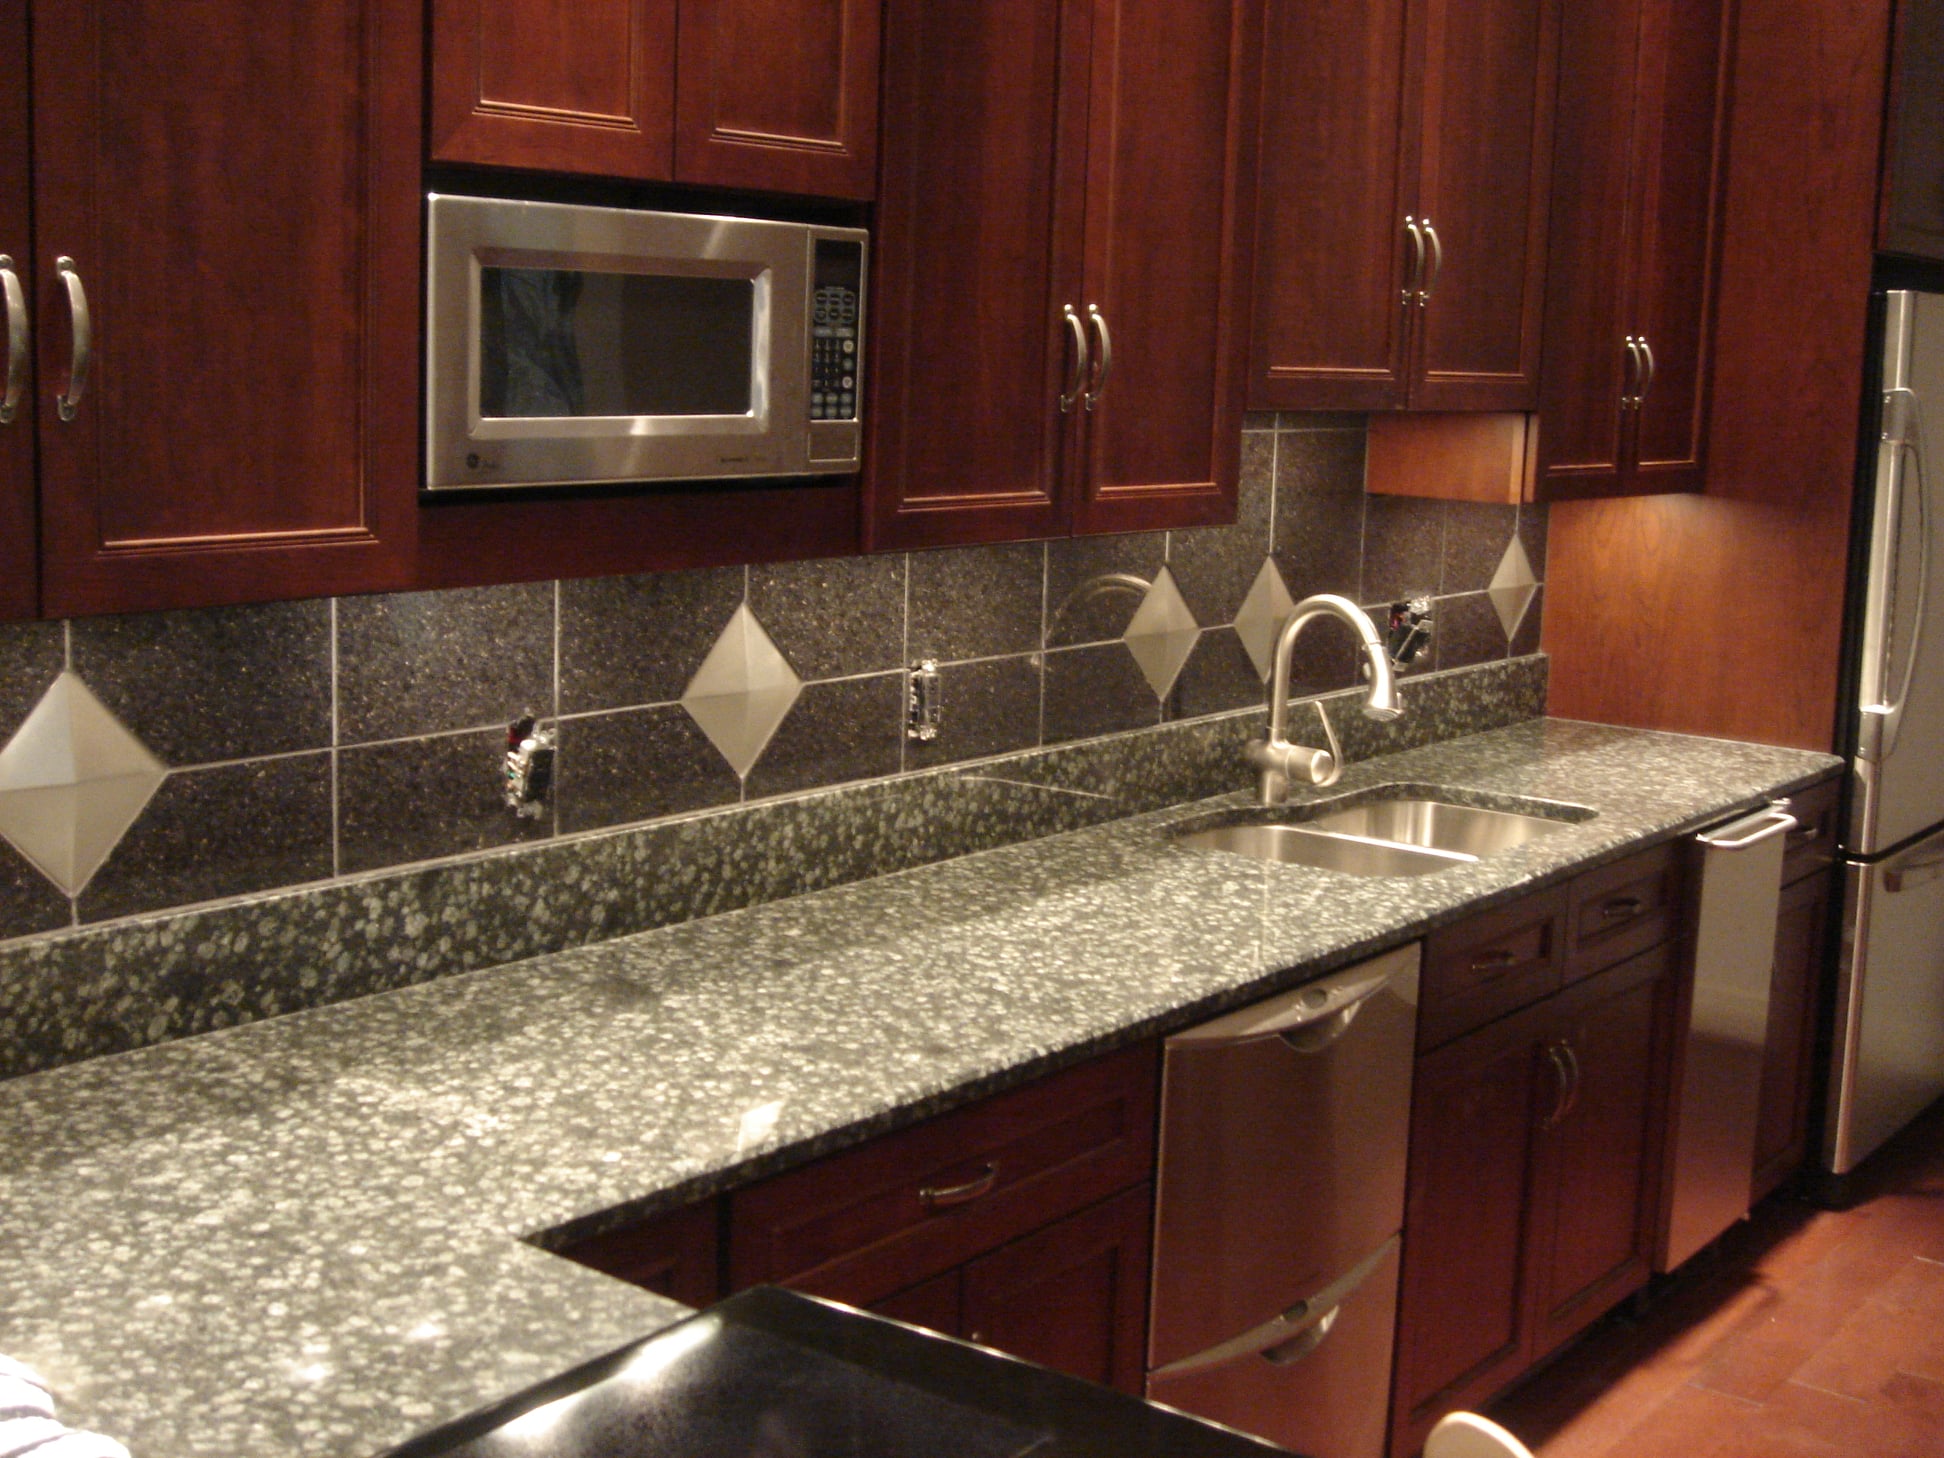 Countertop & cabinets | Vallow Floor Coverings, Inc.